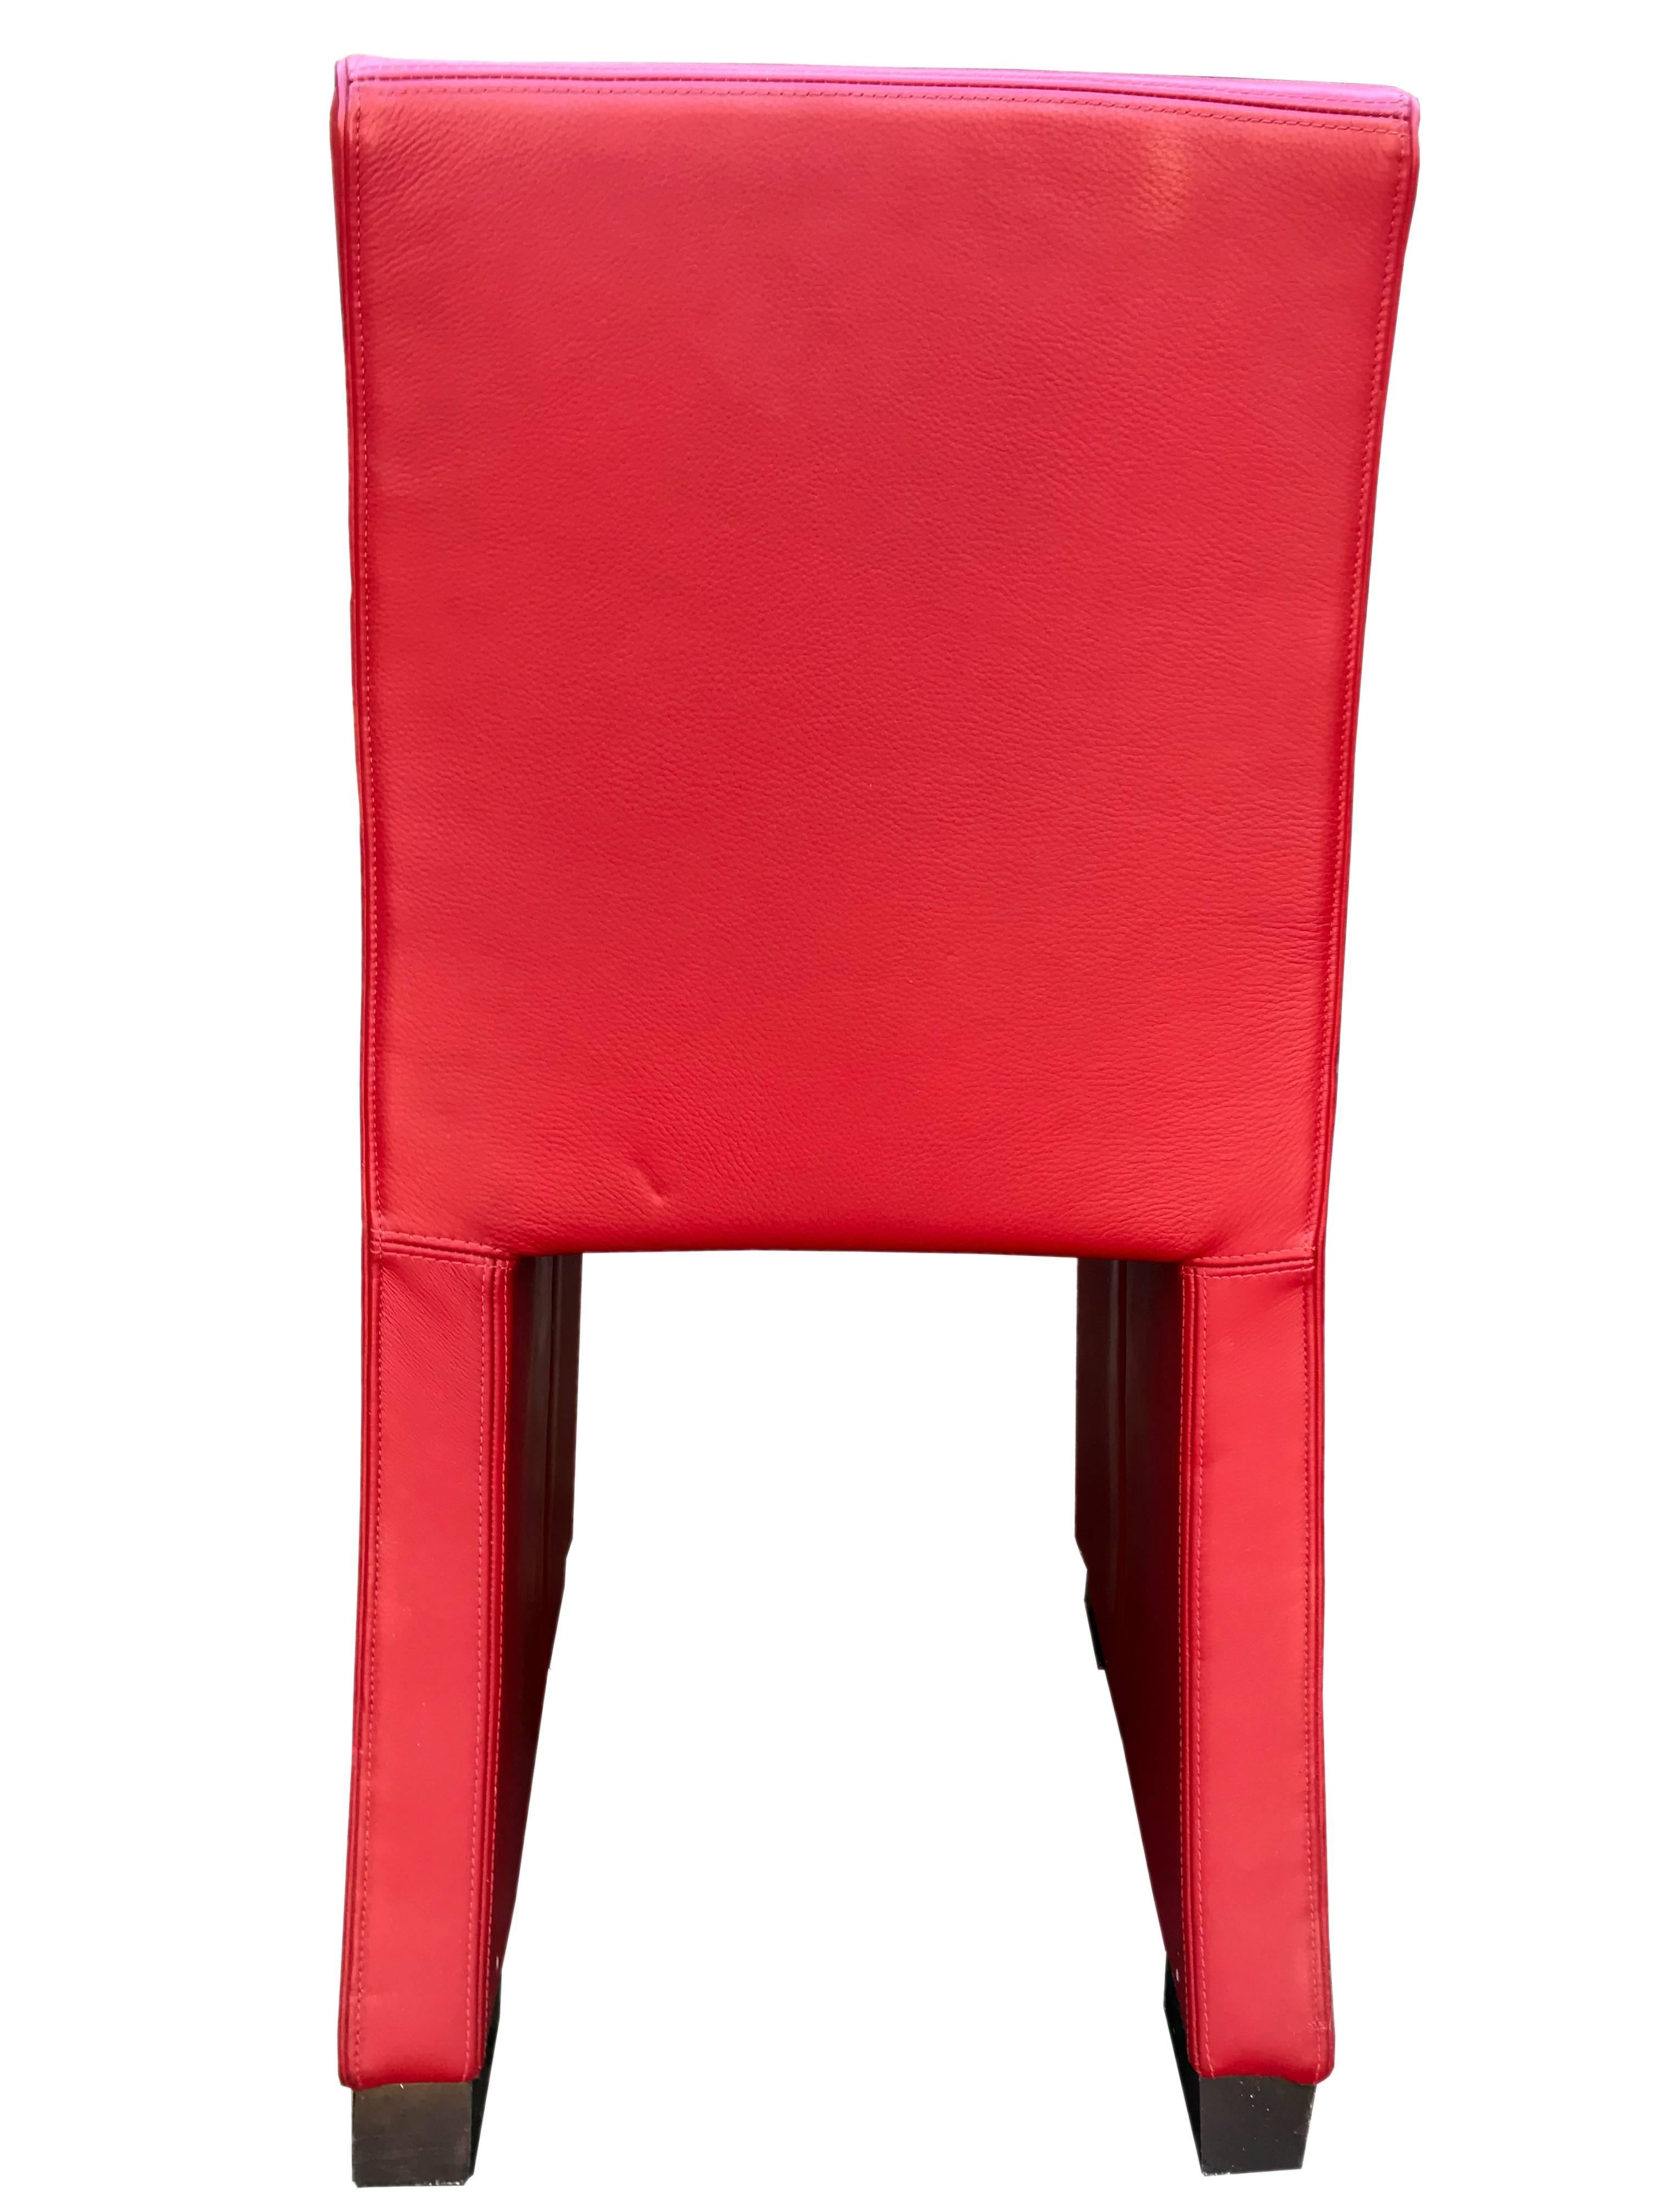 1980s Wittmann's Austrian Red Leather Chairs In Good Condition For Sale In Marbella, ES